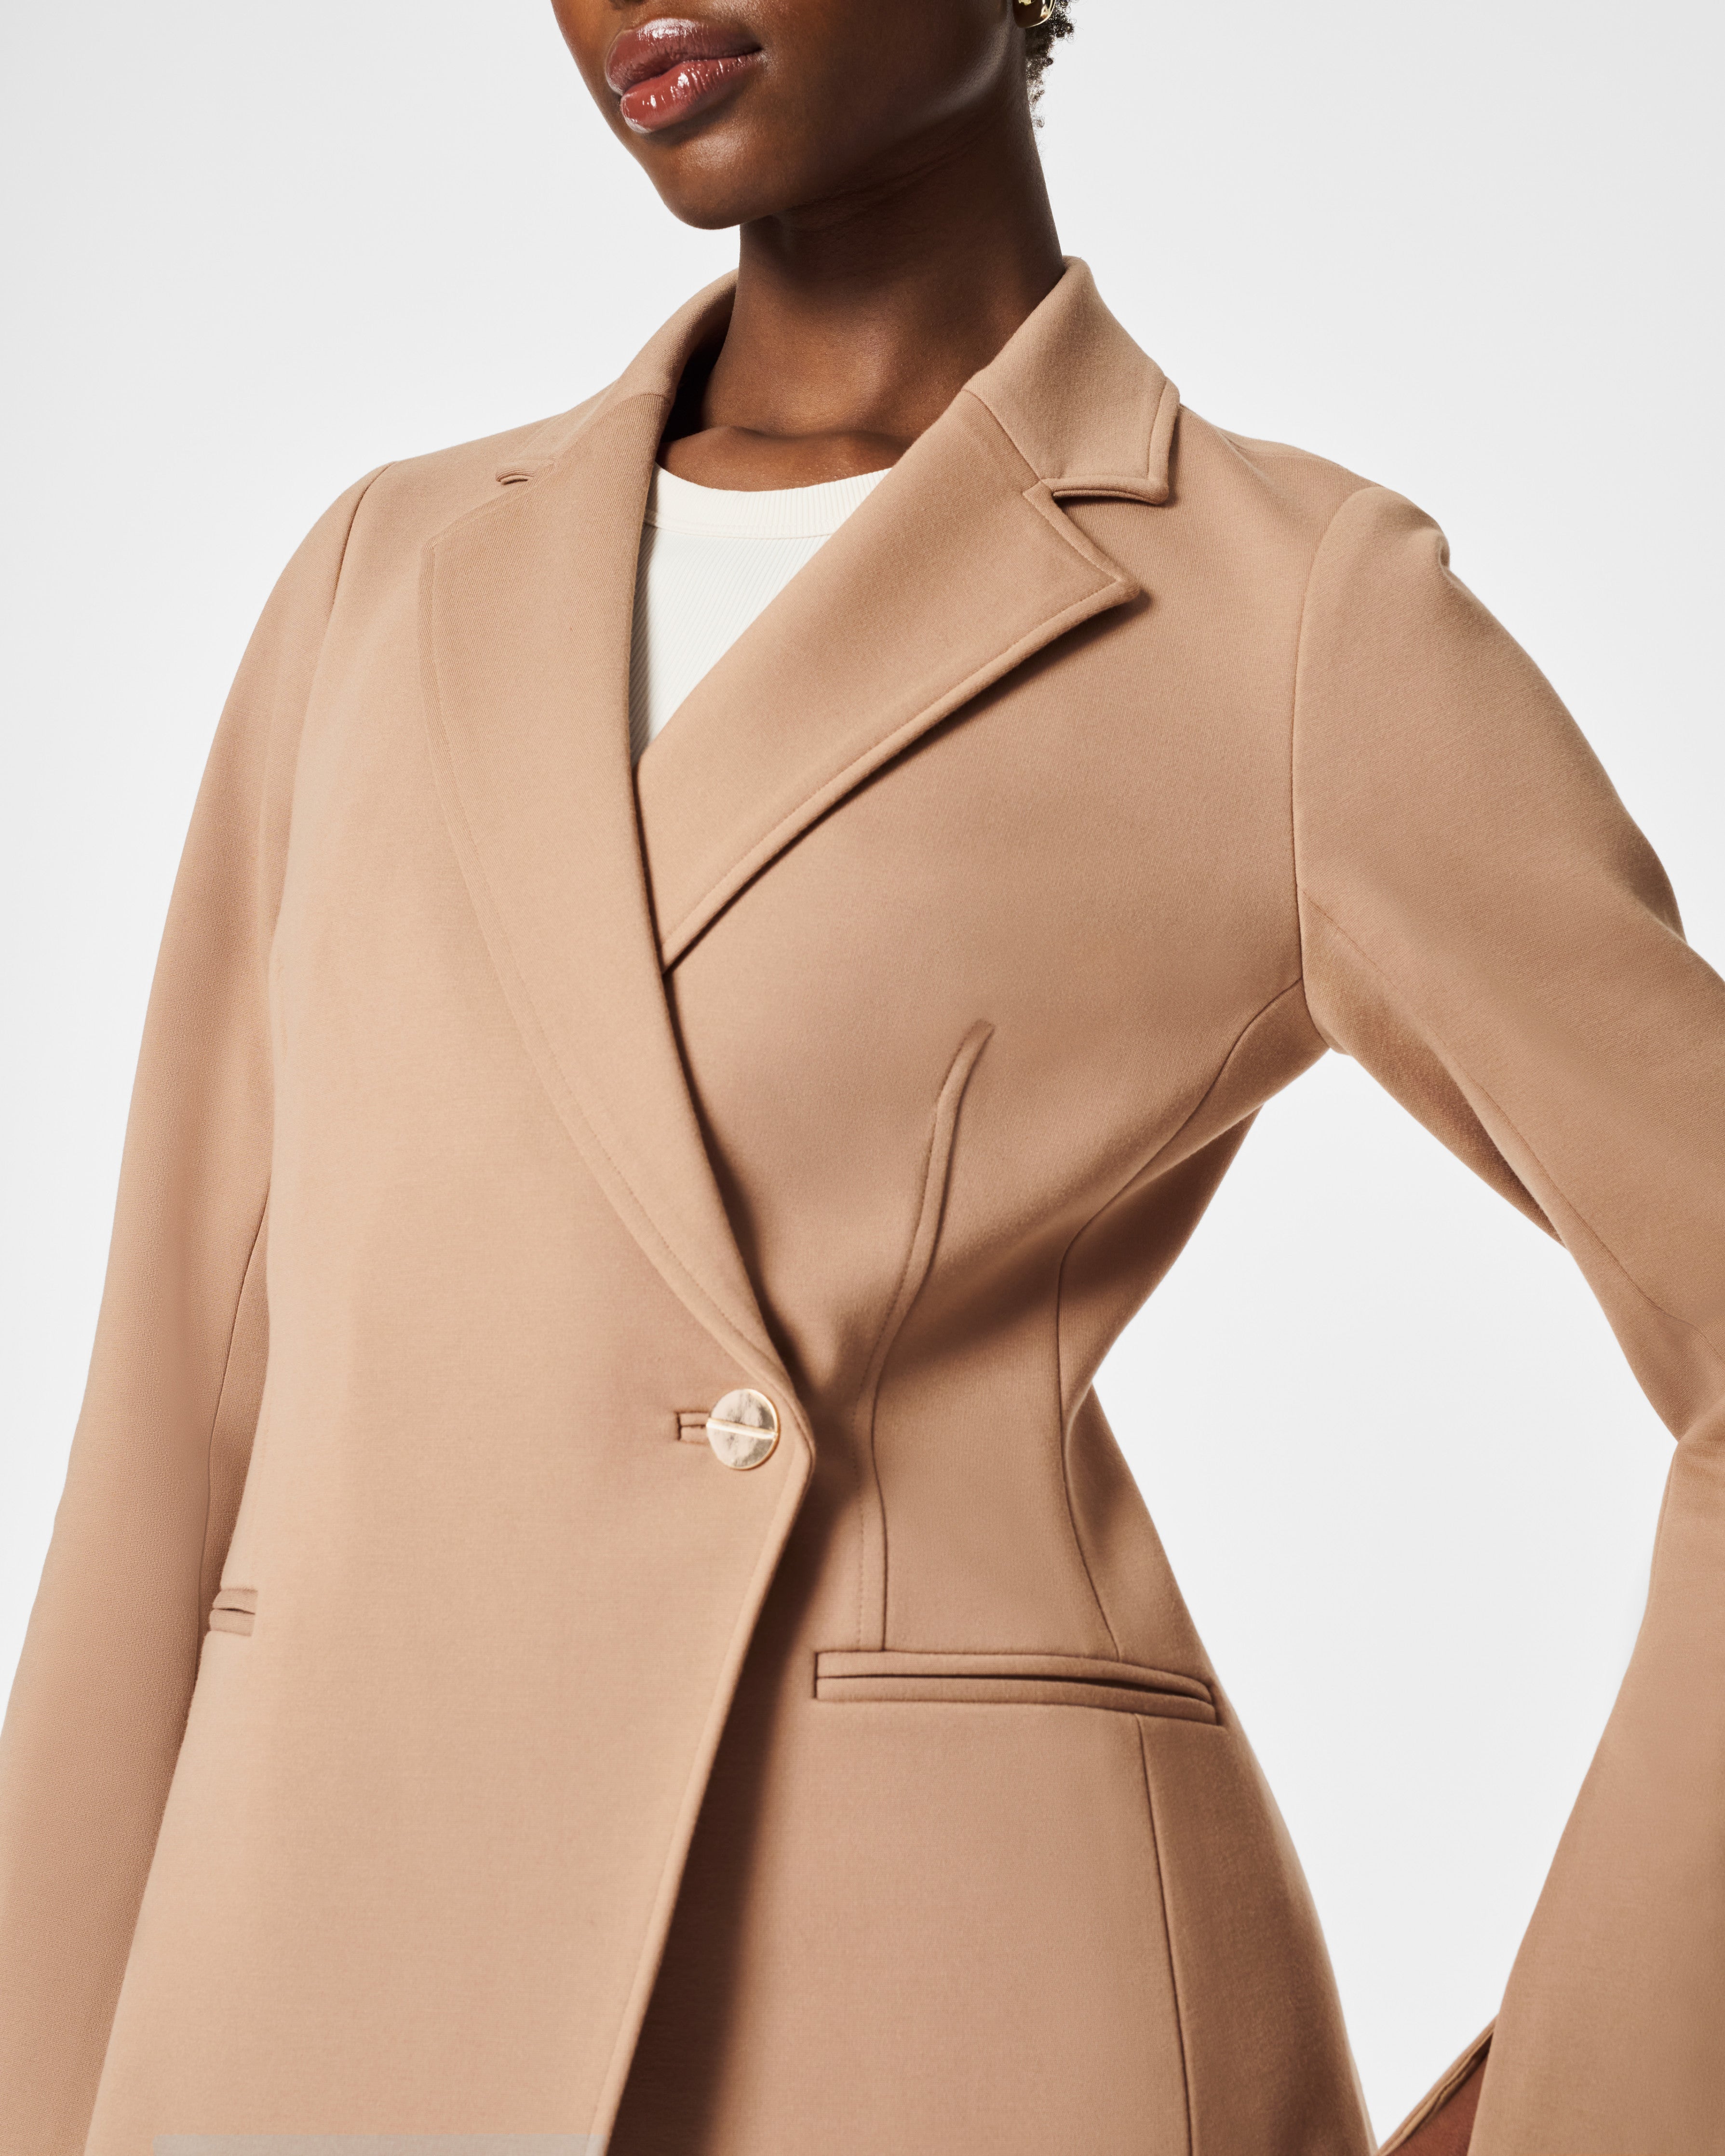 SPANX on X: Comfort that means business. New workwear styles combine  smoothing fabric with intentional design for in-office, weekend wear, and  everything in between. Shop now  #SPANX #Workwear # Blazer #OOTD